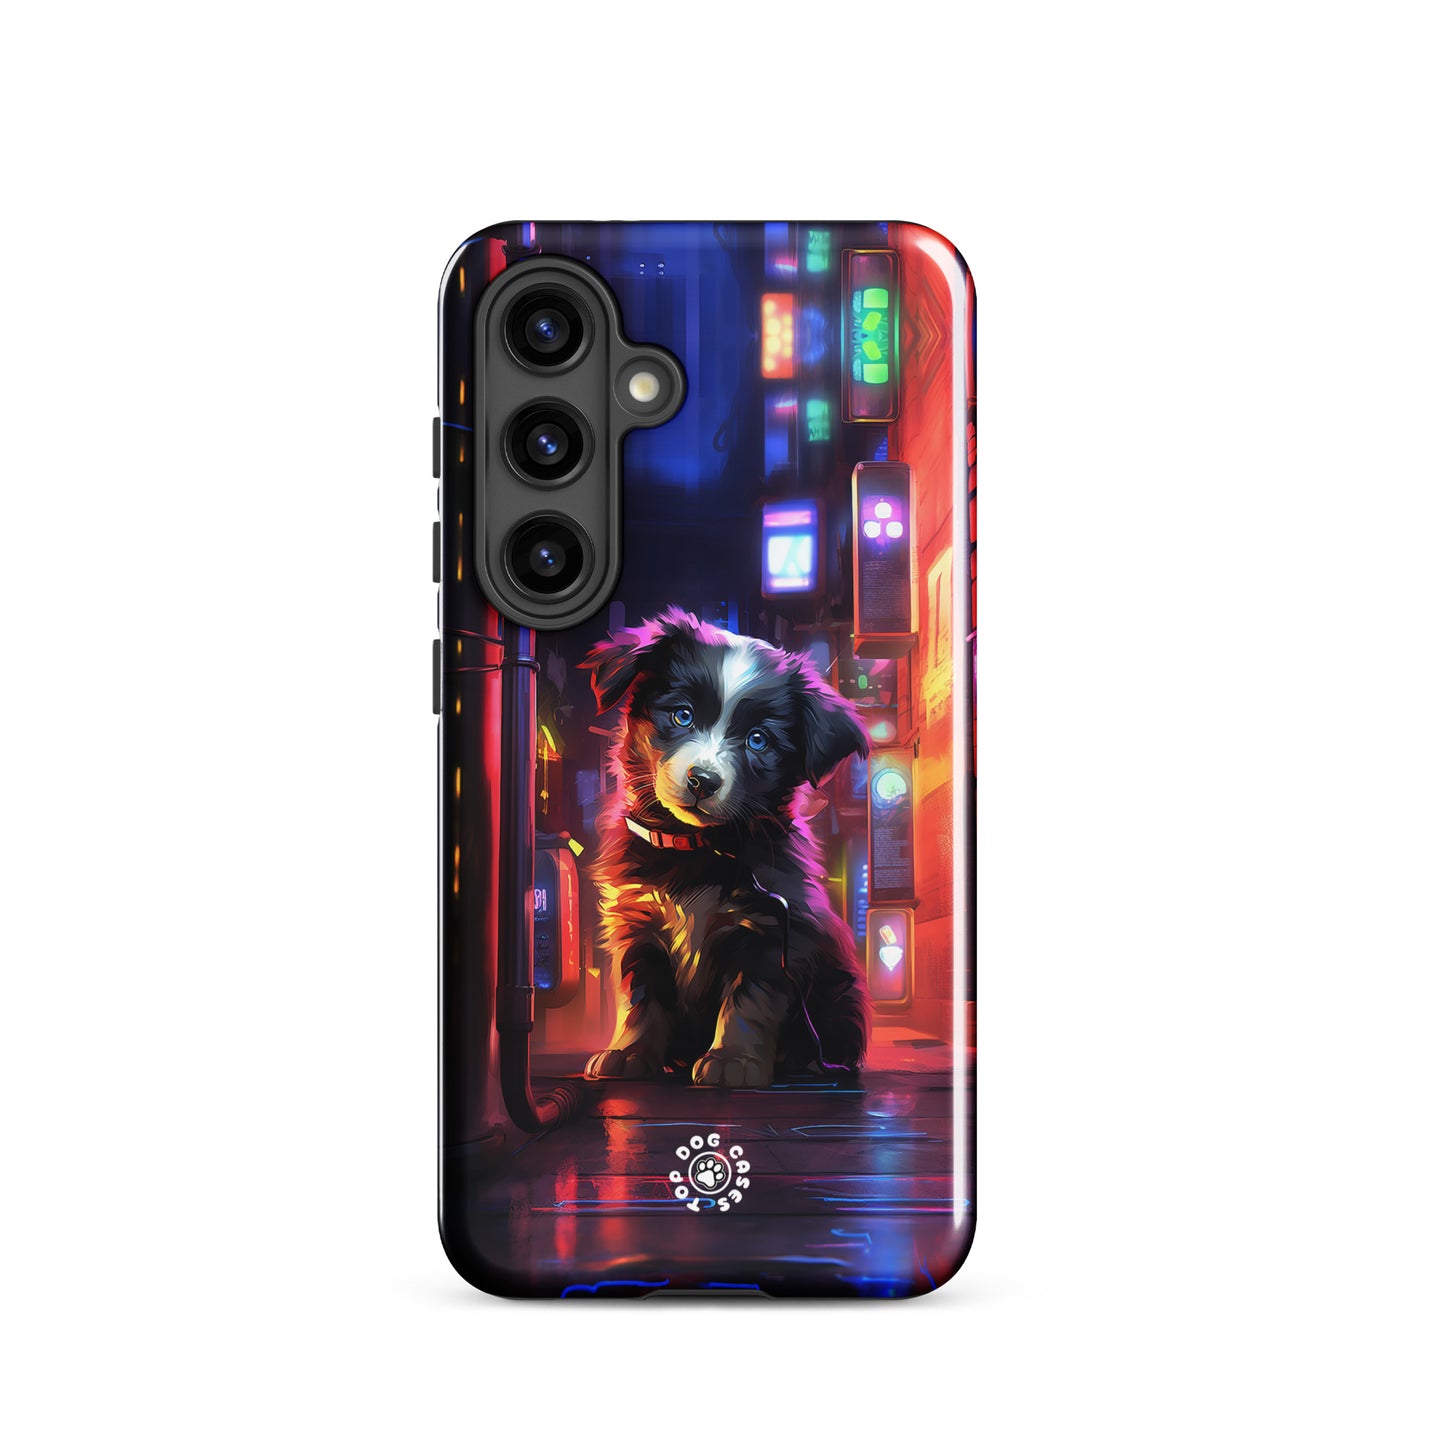 Border Collie in the City - Samsung Phone Case - Cute Phone Cases - Top Dog Cases - #BorderCollie, #CityDog, #CityDogs, #CuteDogs, #SamsungGalaxyCase, #SamsungGalaxyS20, #SamsungGalaxyS21, #SamsungGalaxyS22, #SamsungGalaxyS22Ultra, #SamsungGalaxyS23, #SamsungGalaxyS23Ultra